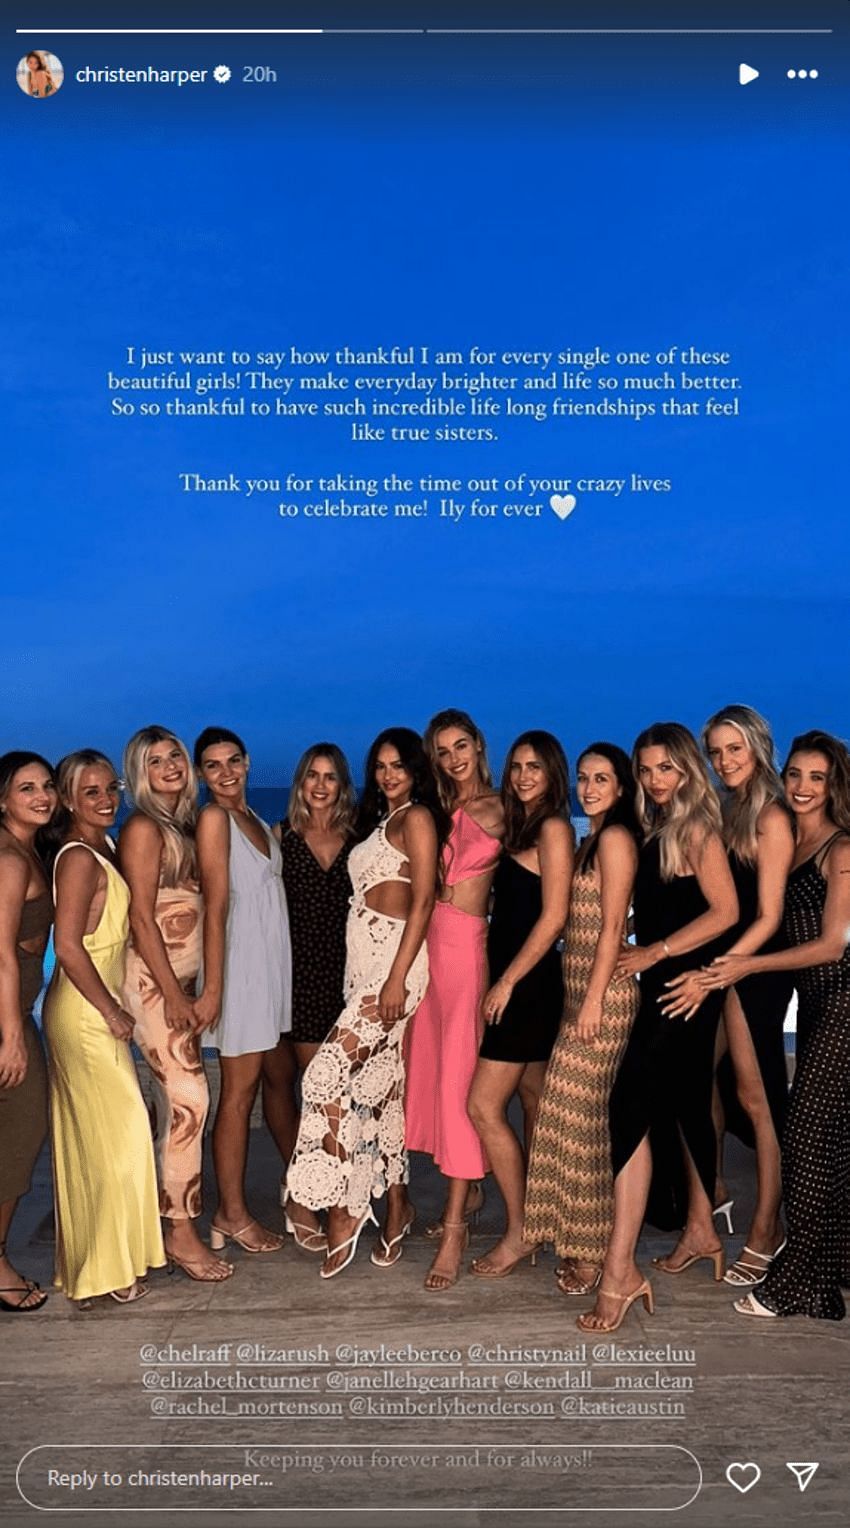 Christen Harper wrote a thank-you note for everyone present at her bachelorette celebration in Cabo San Lucas, Mexico.